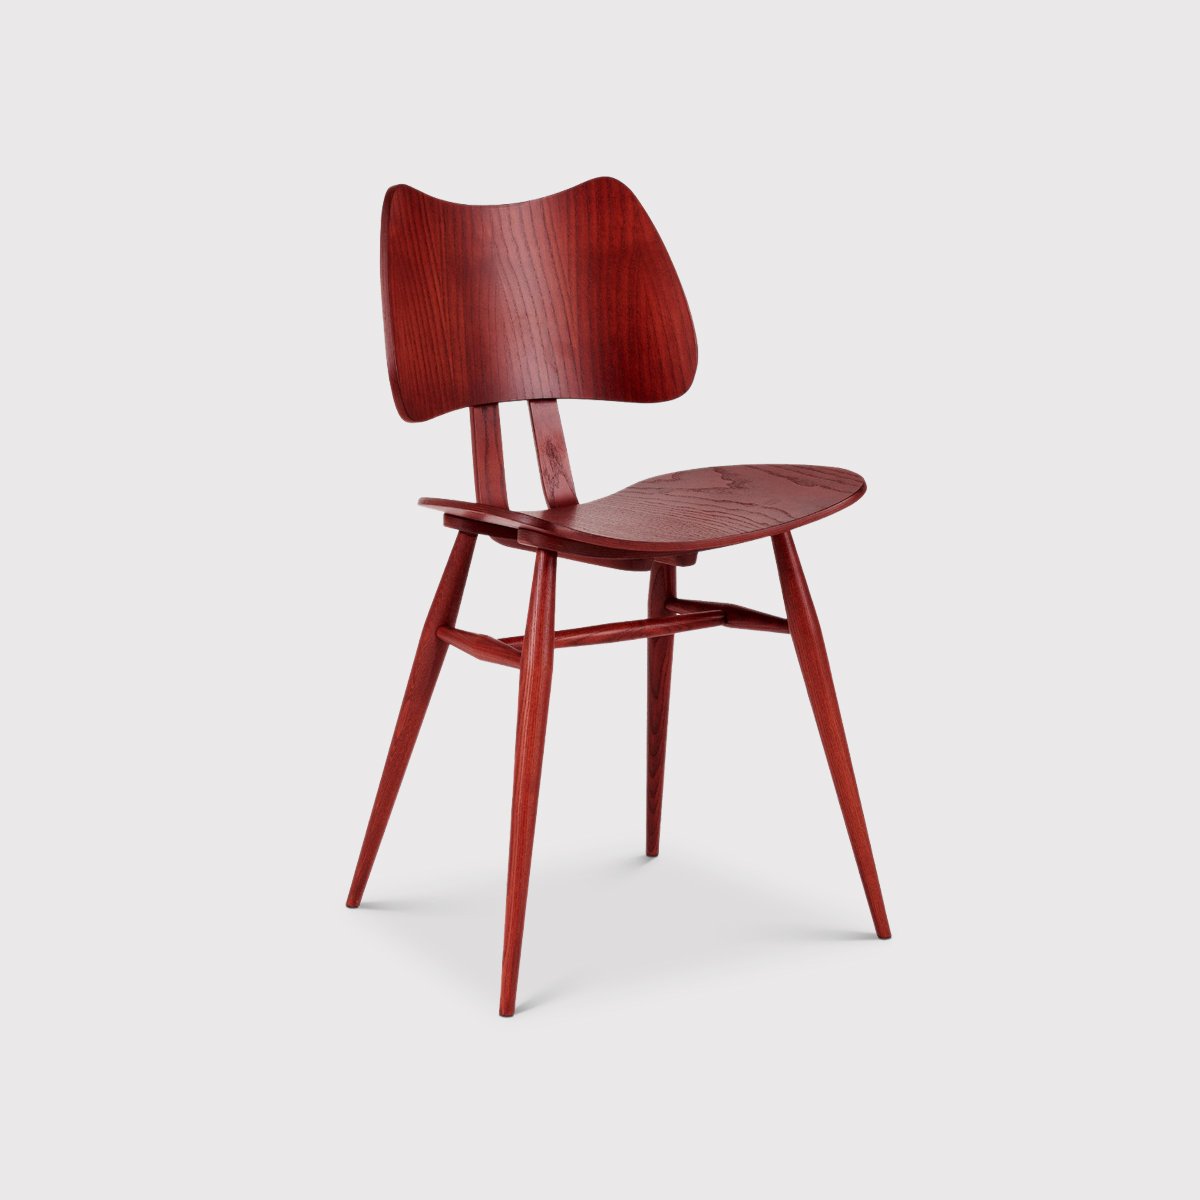 L.Ercolani Butterfly Dining Chair, Red Wood | Barker & Stonehouse